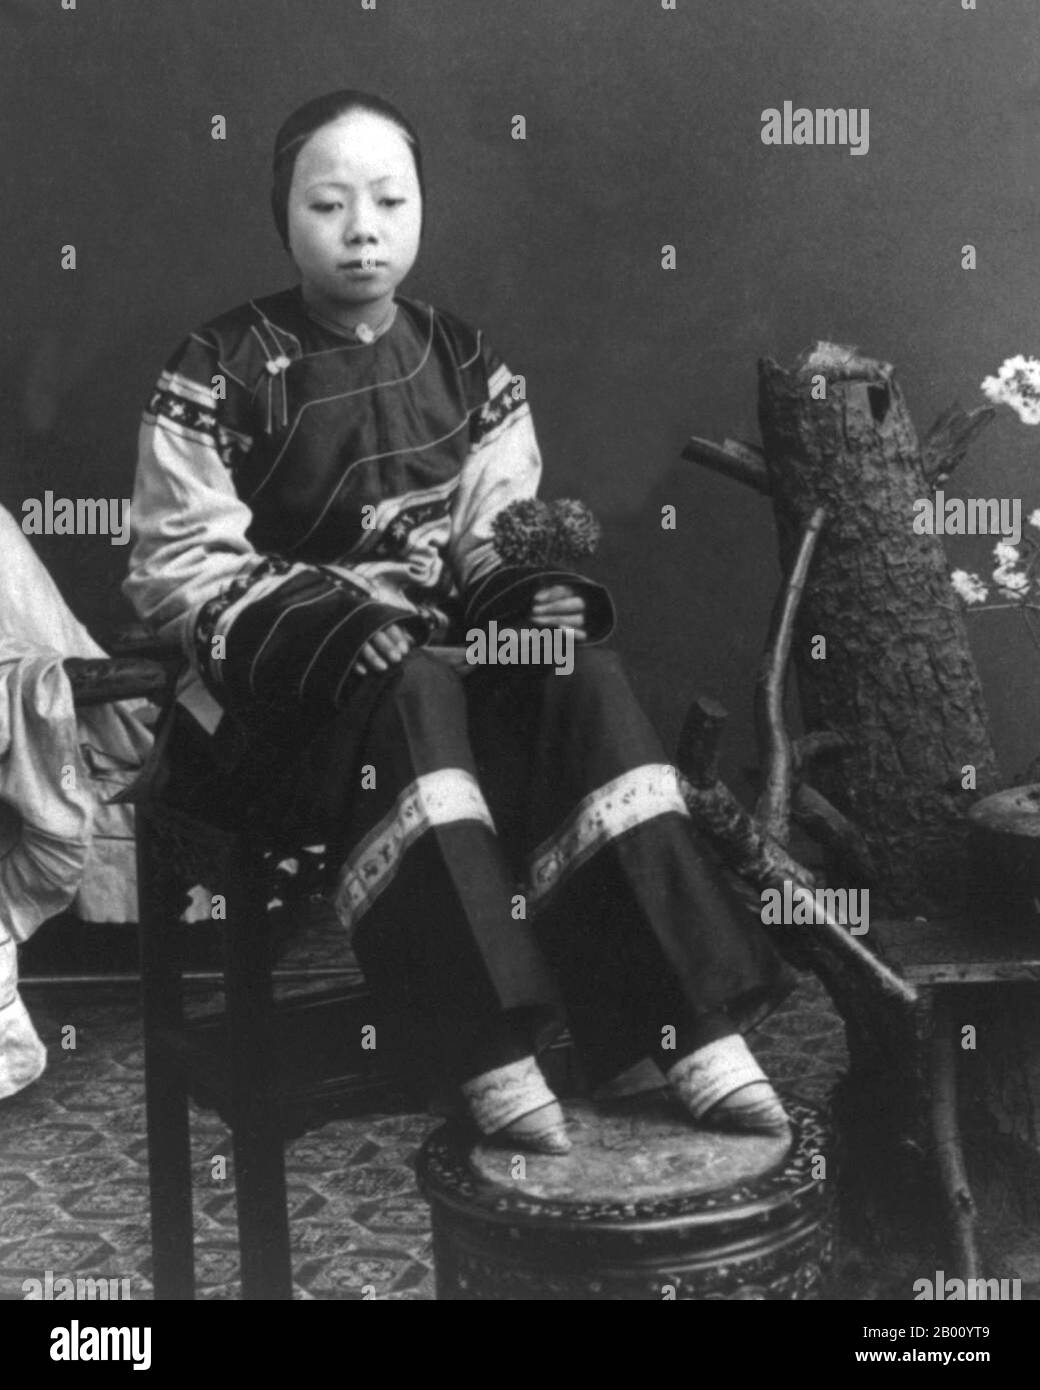 China: Bound feet continued to exist in Old Shanghai's brothels and ...